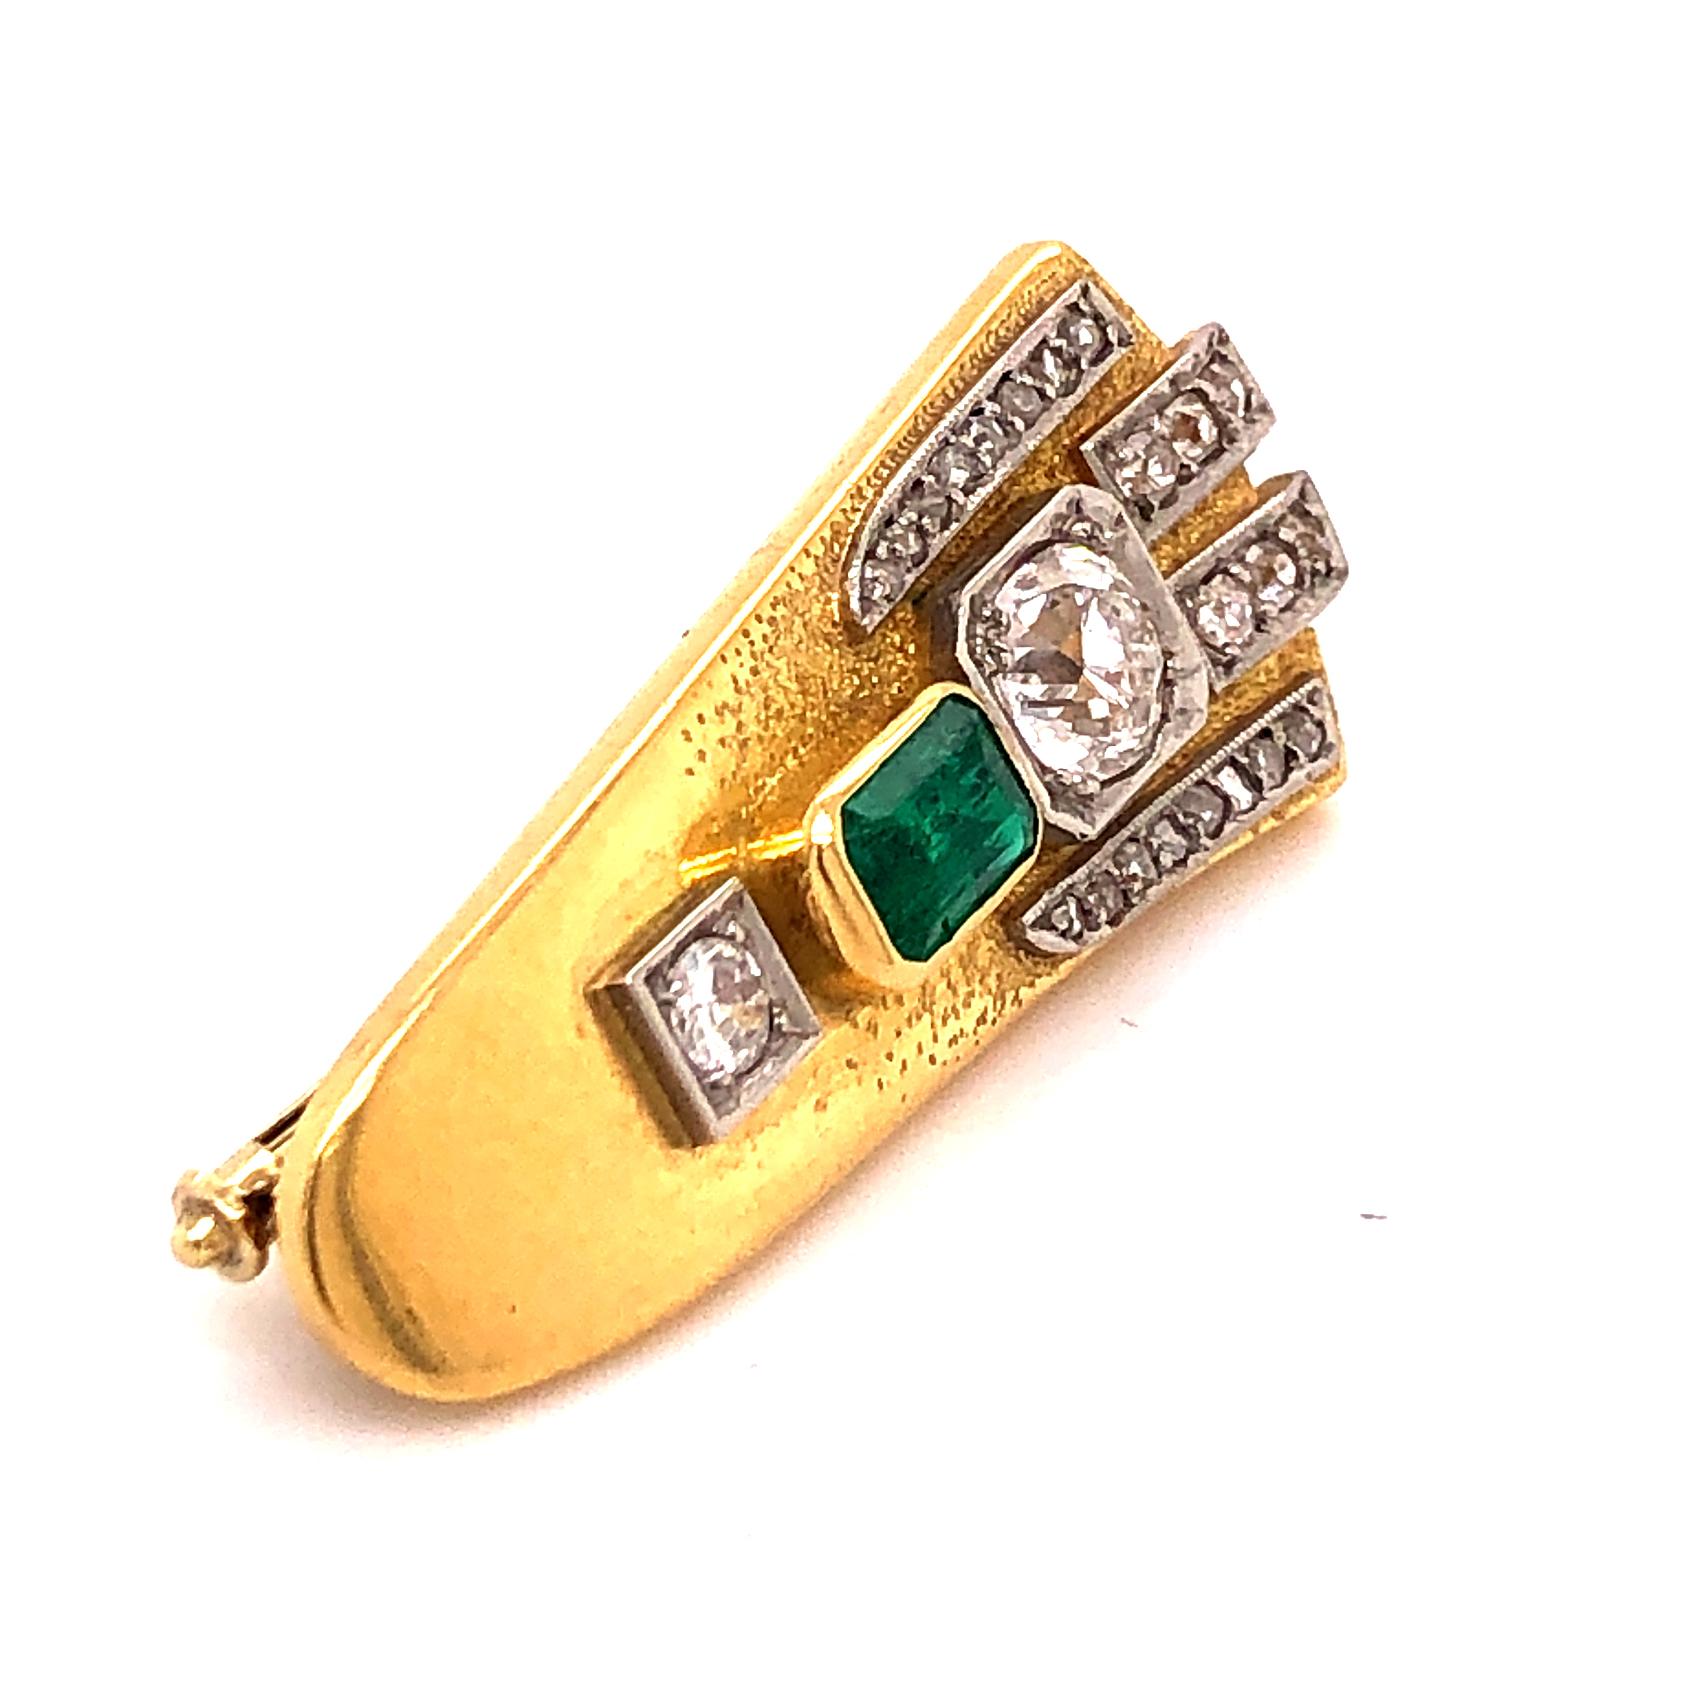 A lovely brooch in yellow gold with a Columbian emerald and old European cut diamonds. The big centre stone weighs approximately 0.6 carats. The brooch is in 18k yellow gold and it has an abraded gold design at the top. The clip mechanism is in 14k